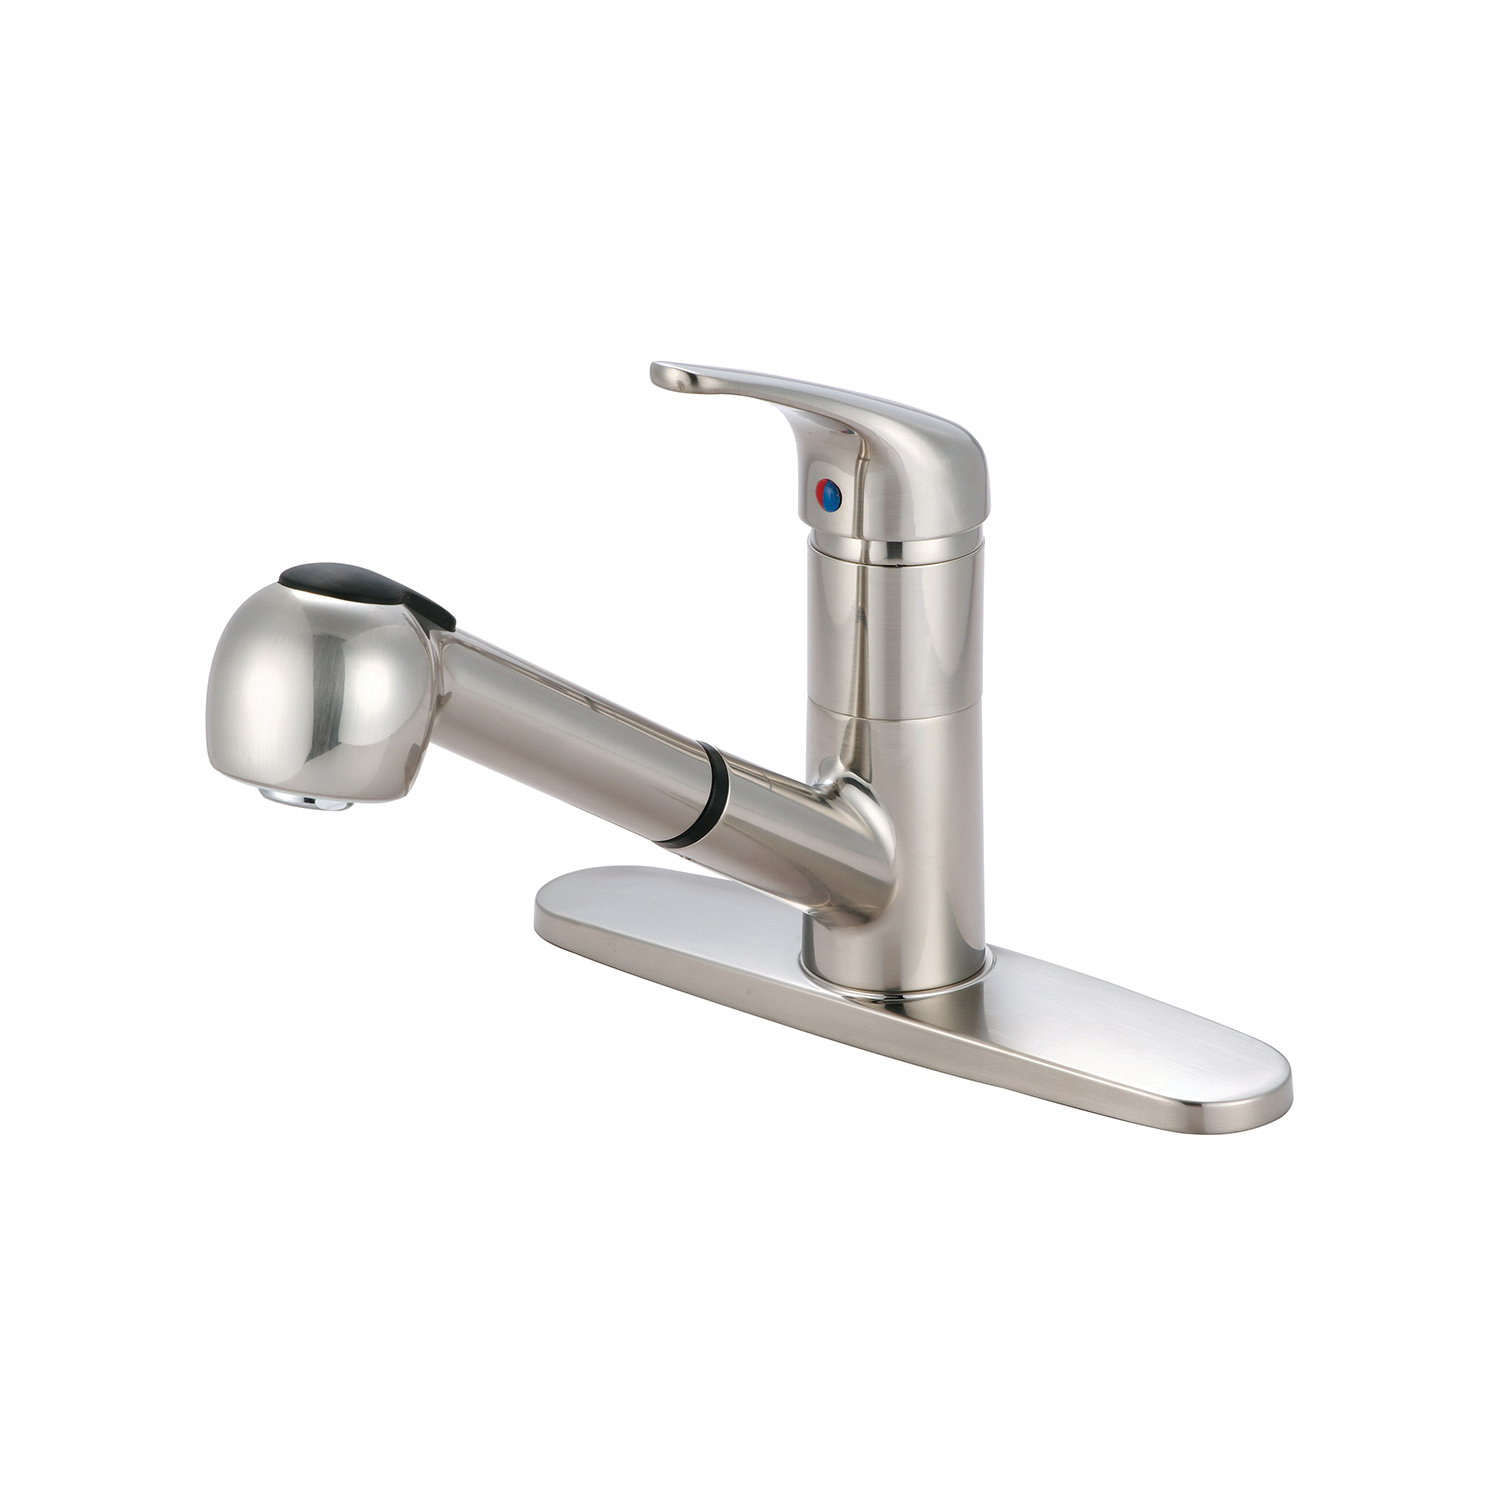 OLYMPIA K-5030-BN Kitchen Faucet, Elite, 1.8 gpm Flow Rate, 180 deg Swivel Spout, PVD Brushed Nickel, 1 Handles, 1/3 Faucet Holes